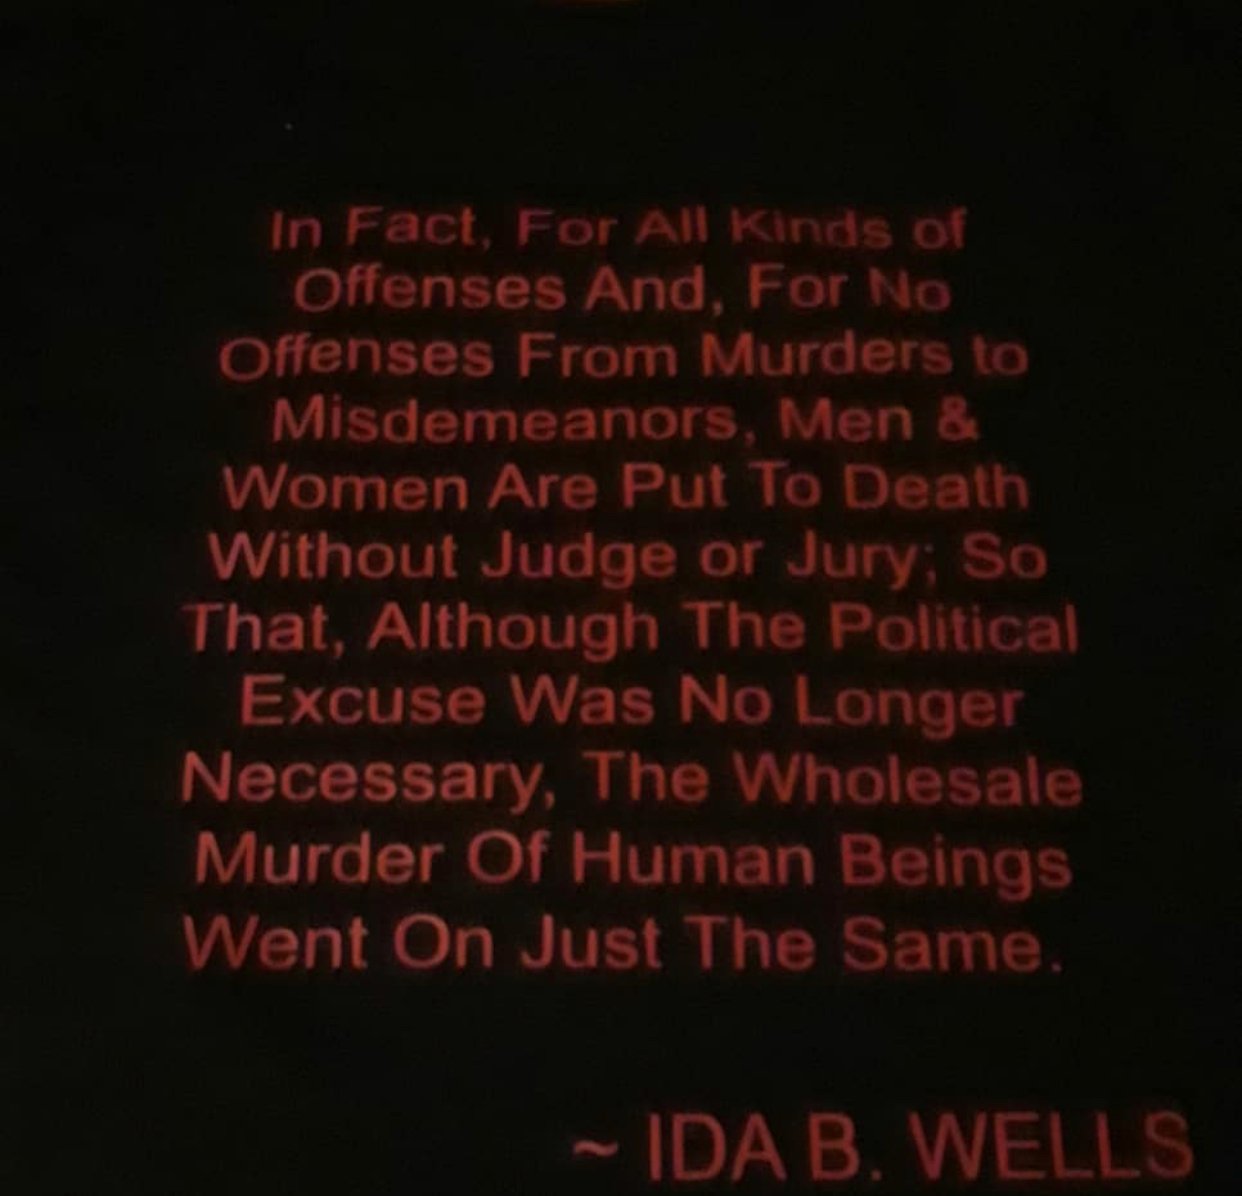 Image of I’M THAT IDA B WELLS TYPE OF CHRISTIAN T-SHIRT PLEASE ALLOW UP TO 10-14 BUSINESS DAYS TO RECEIVE